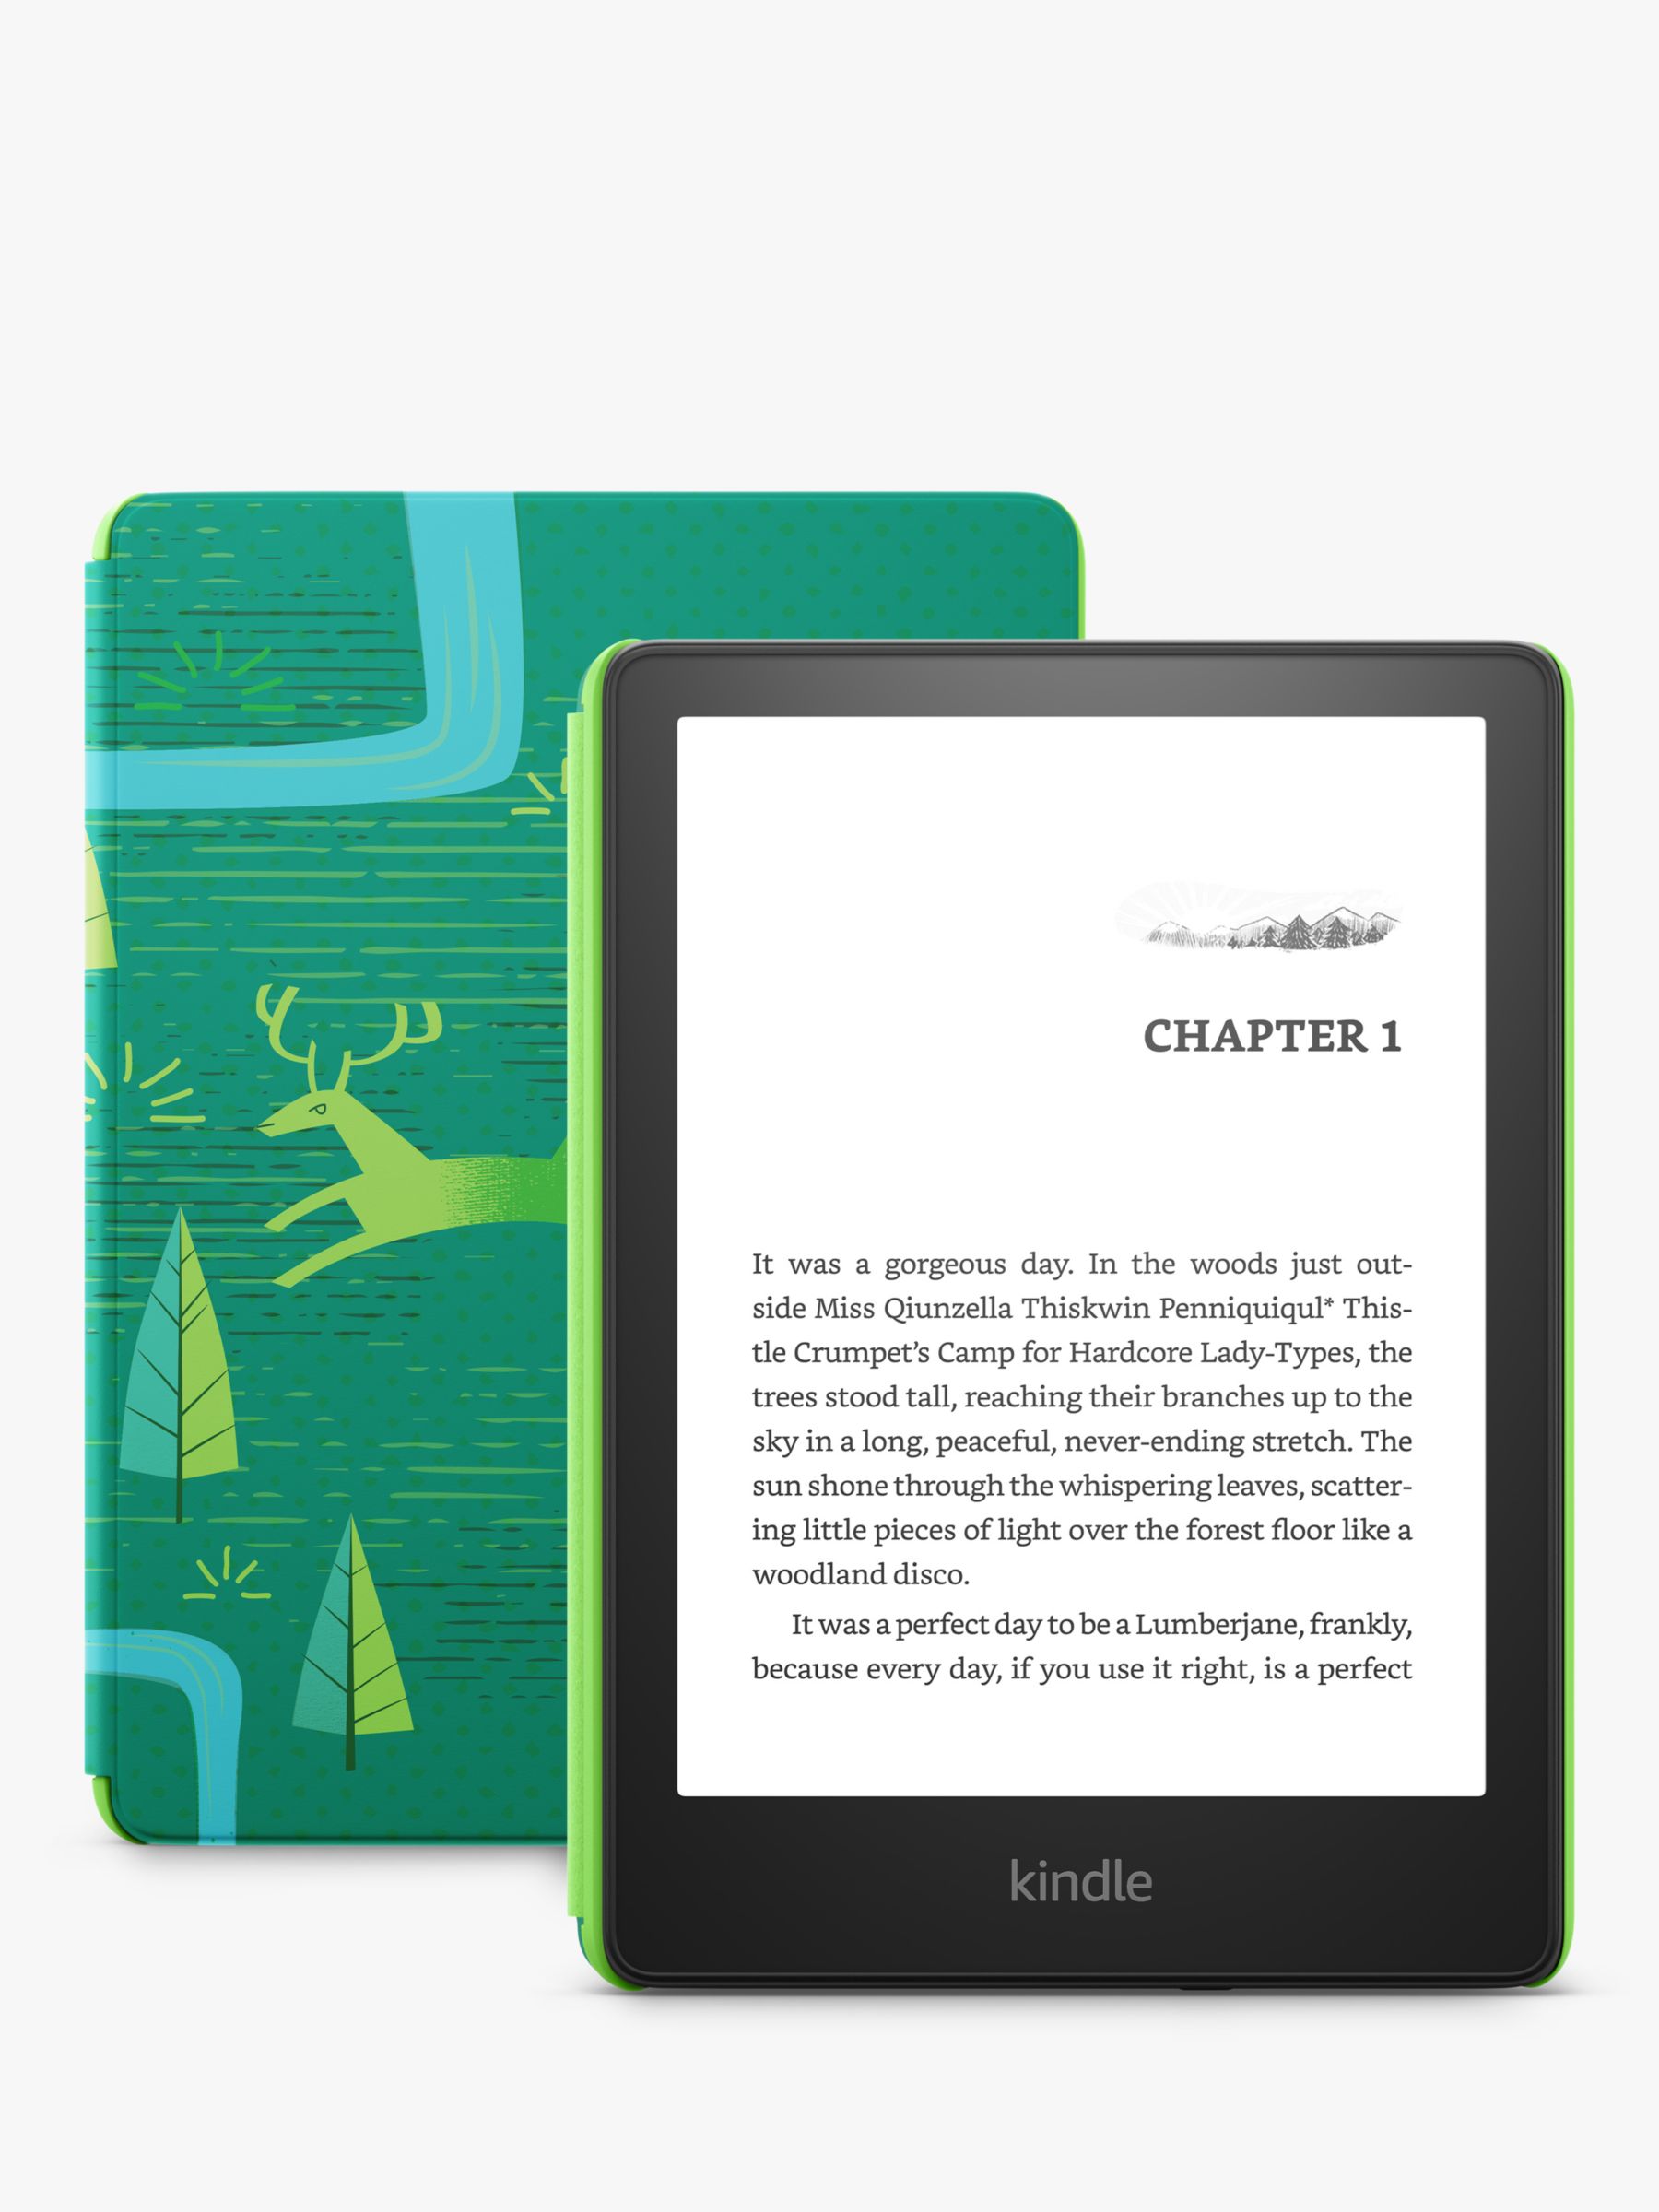 quietly releases new 16GB Kindle Paperwhite for $149.99